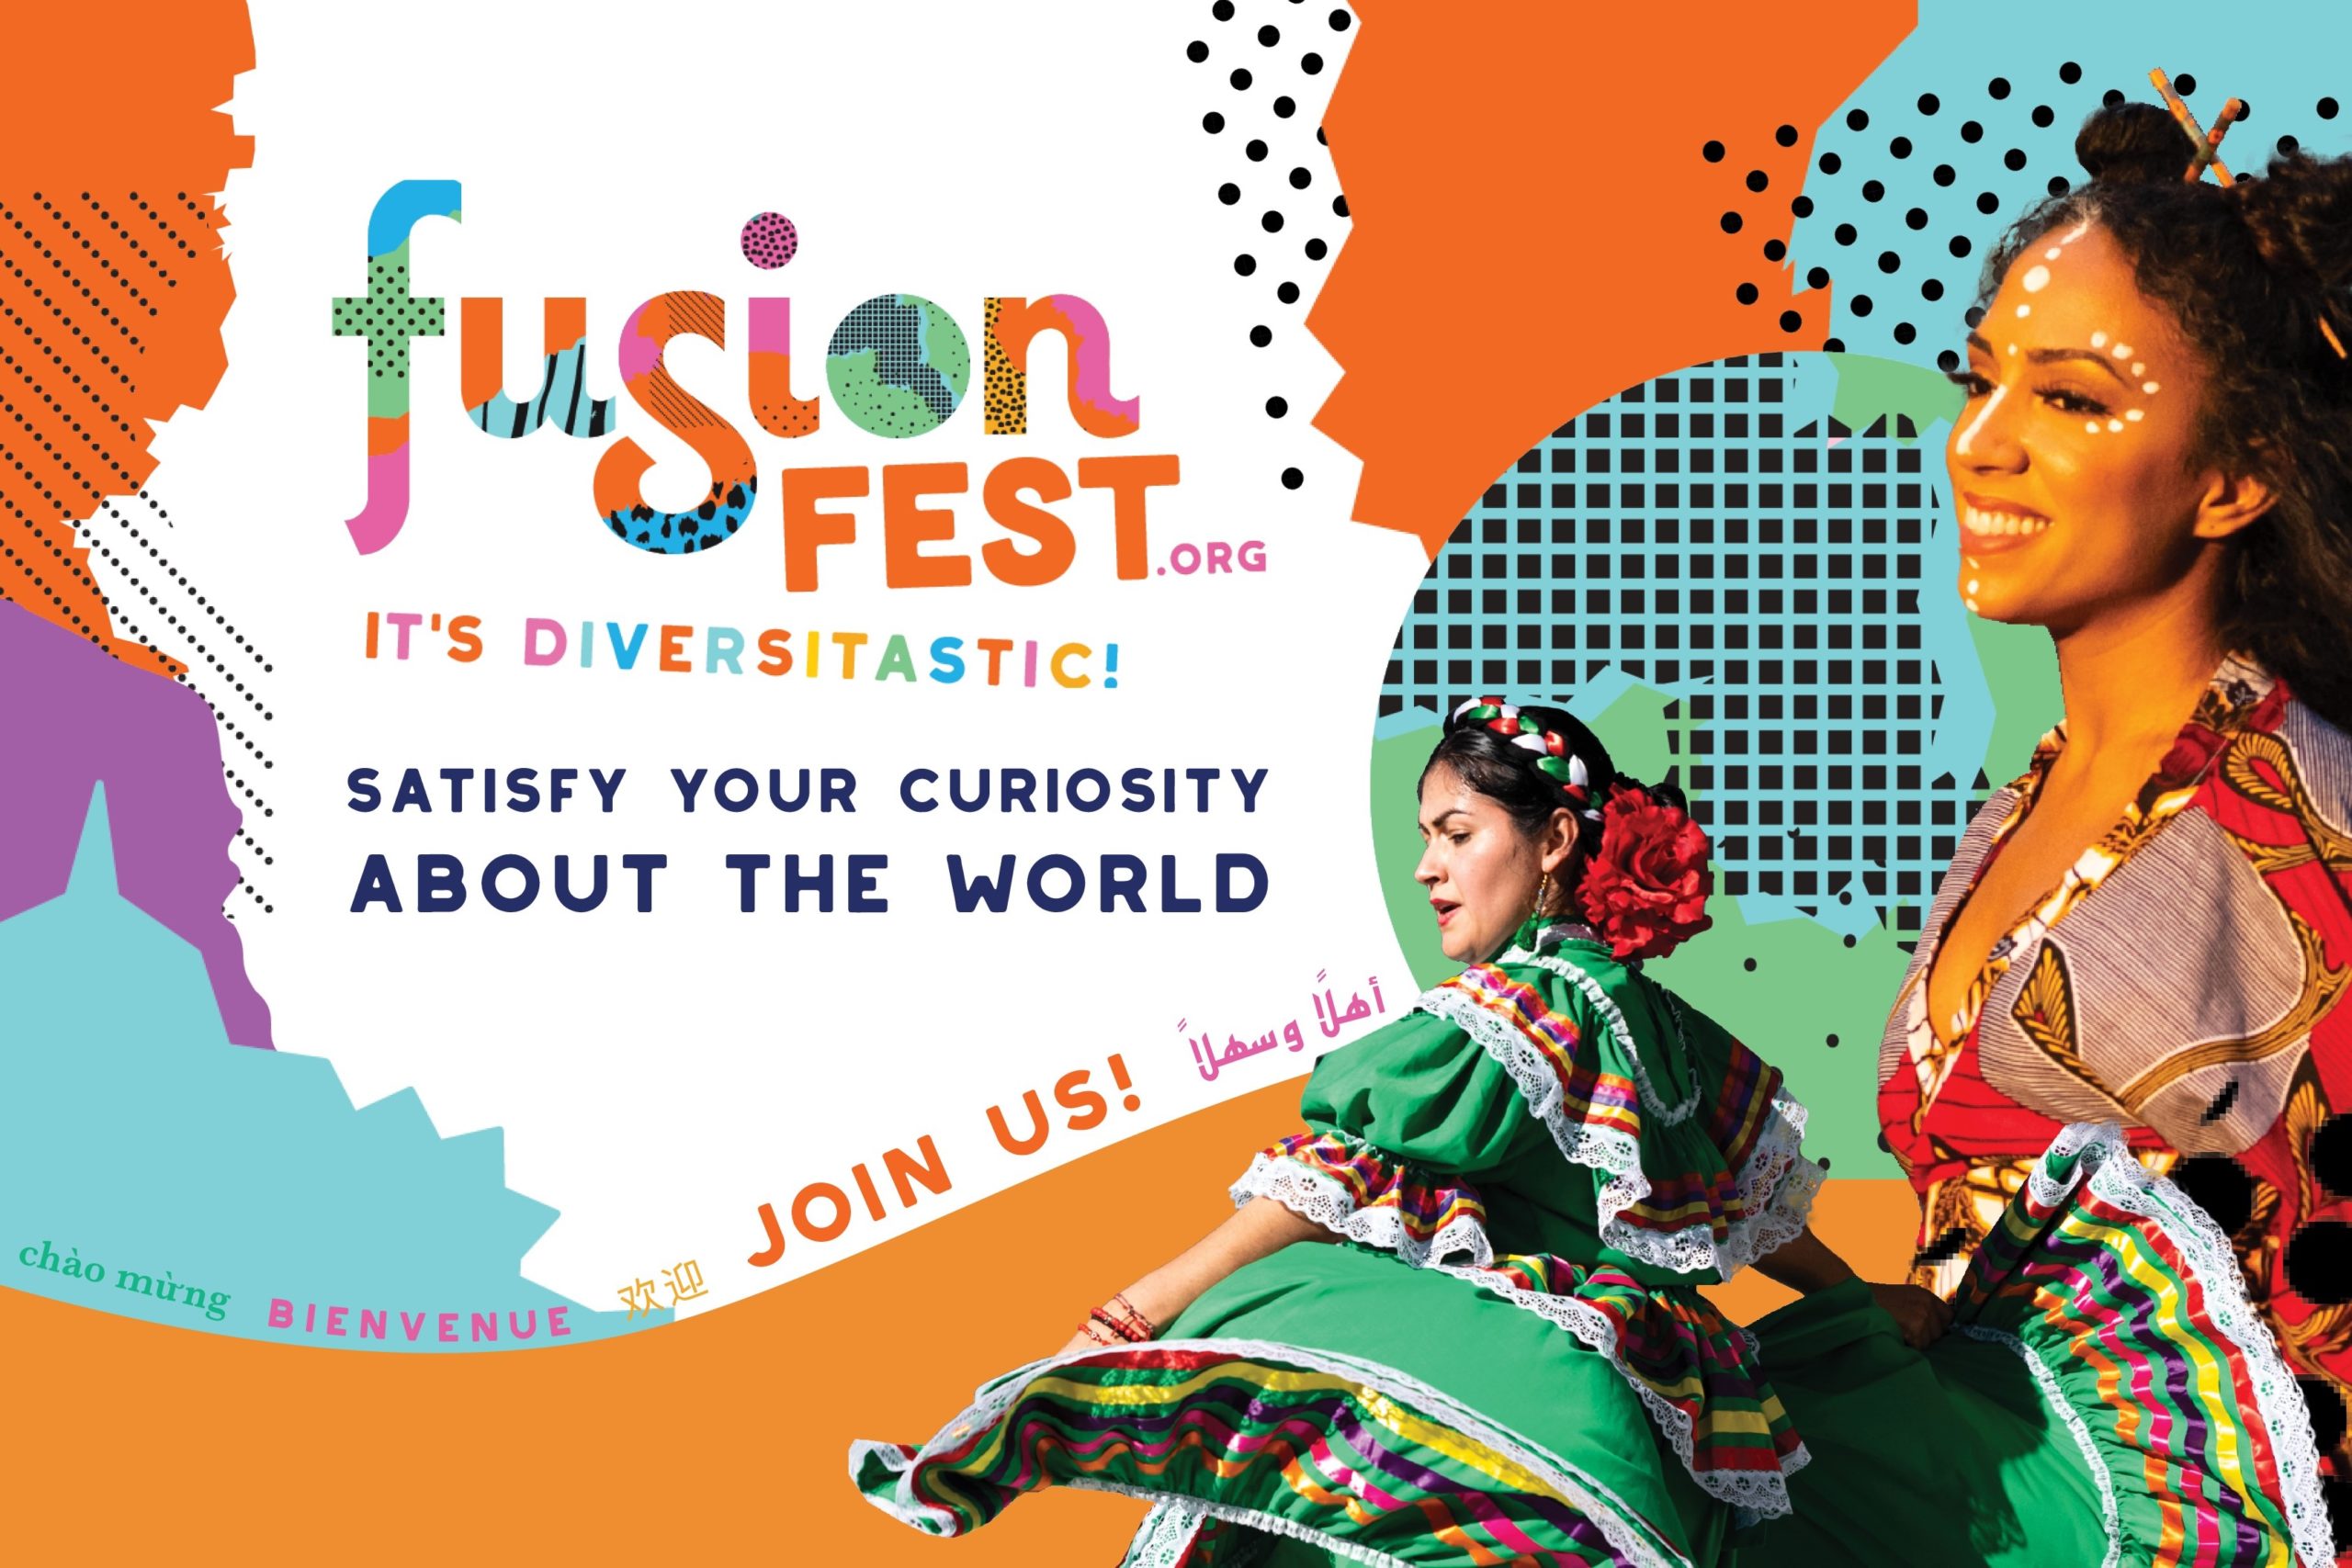 5th Annual FusionFest Returns to Downtown Orlando